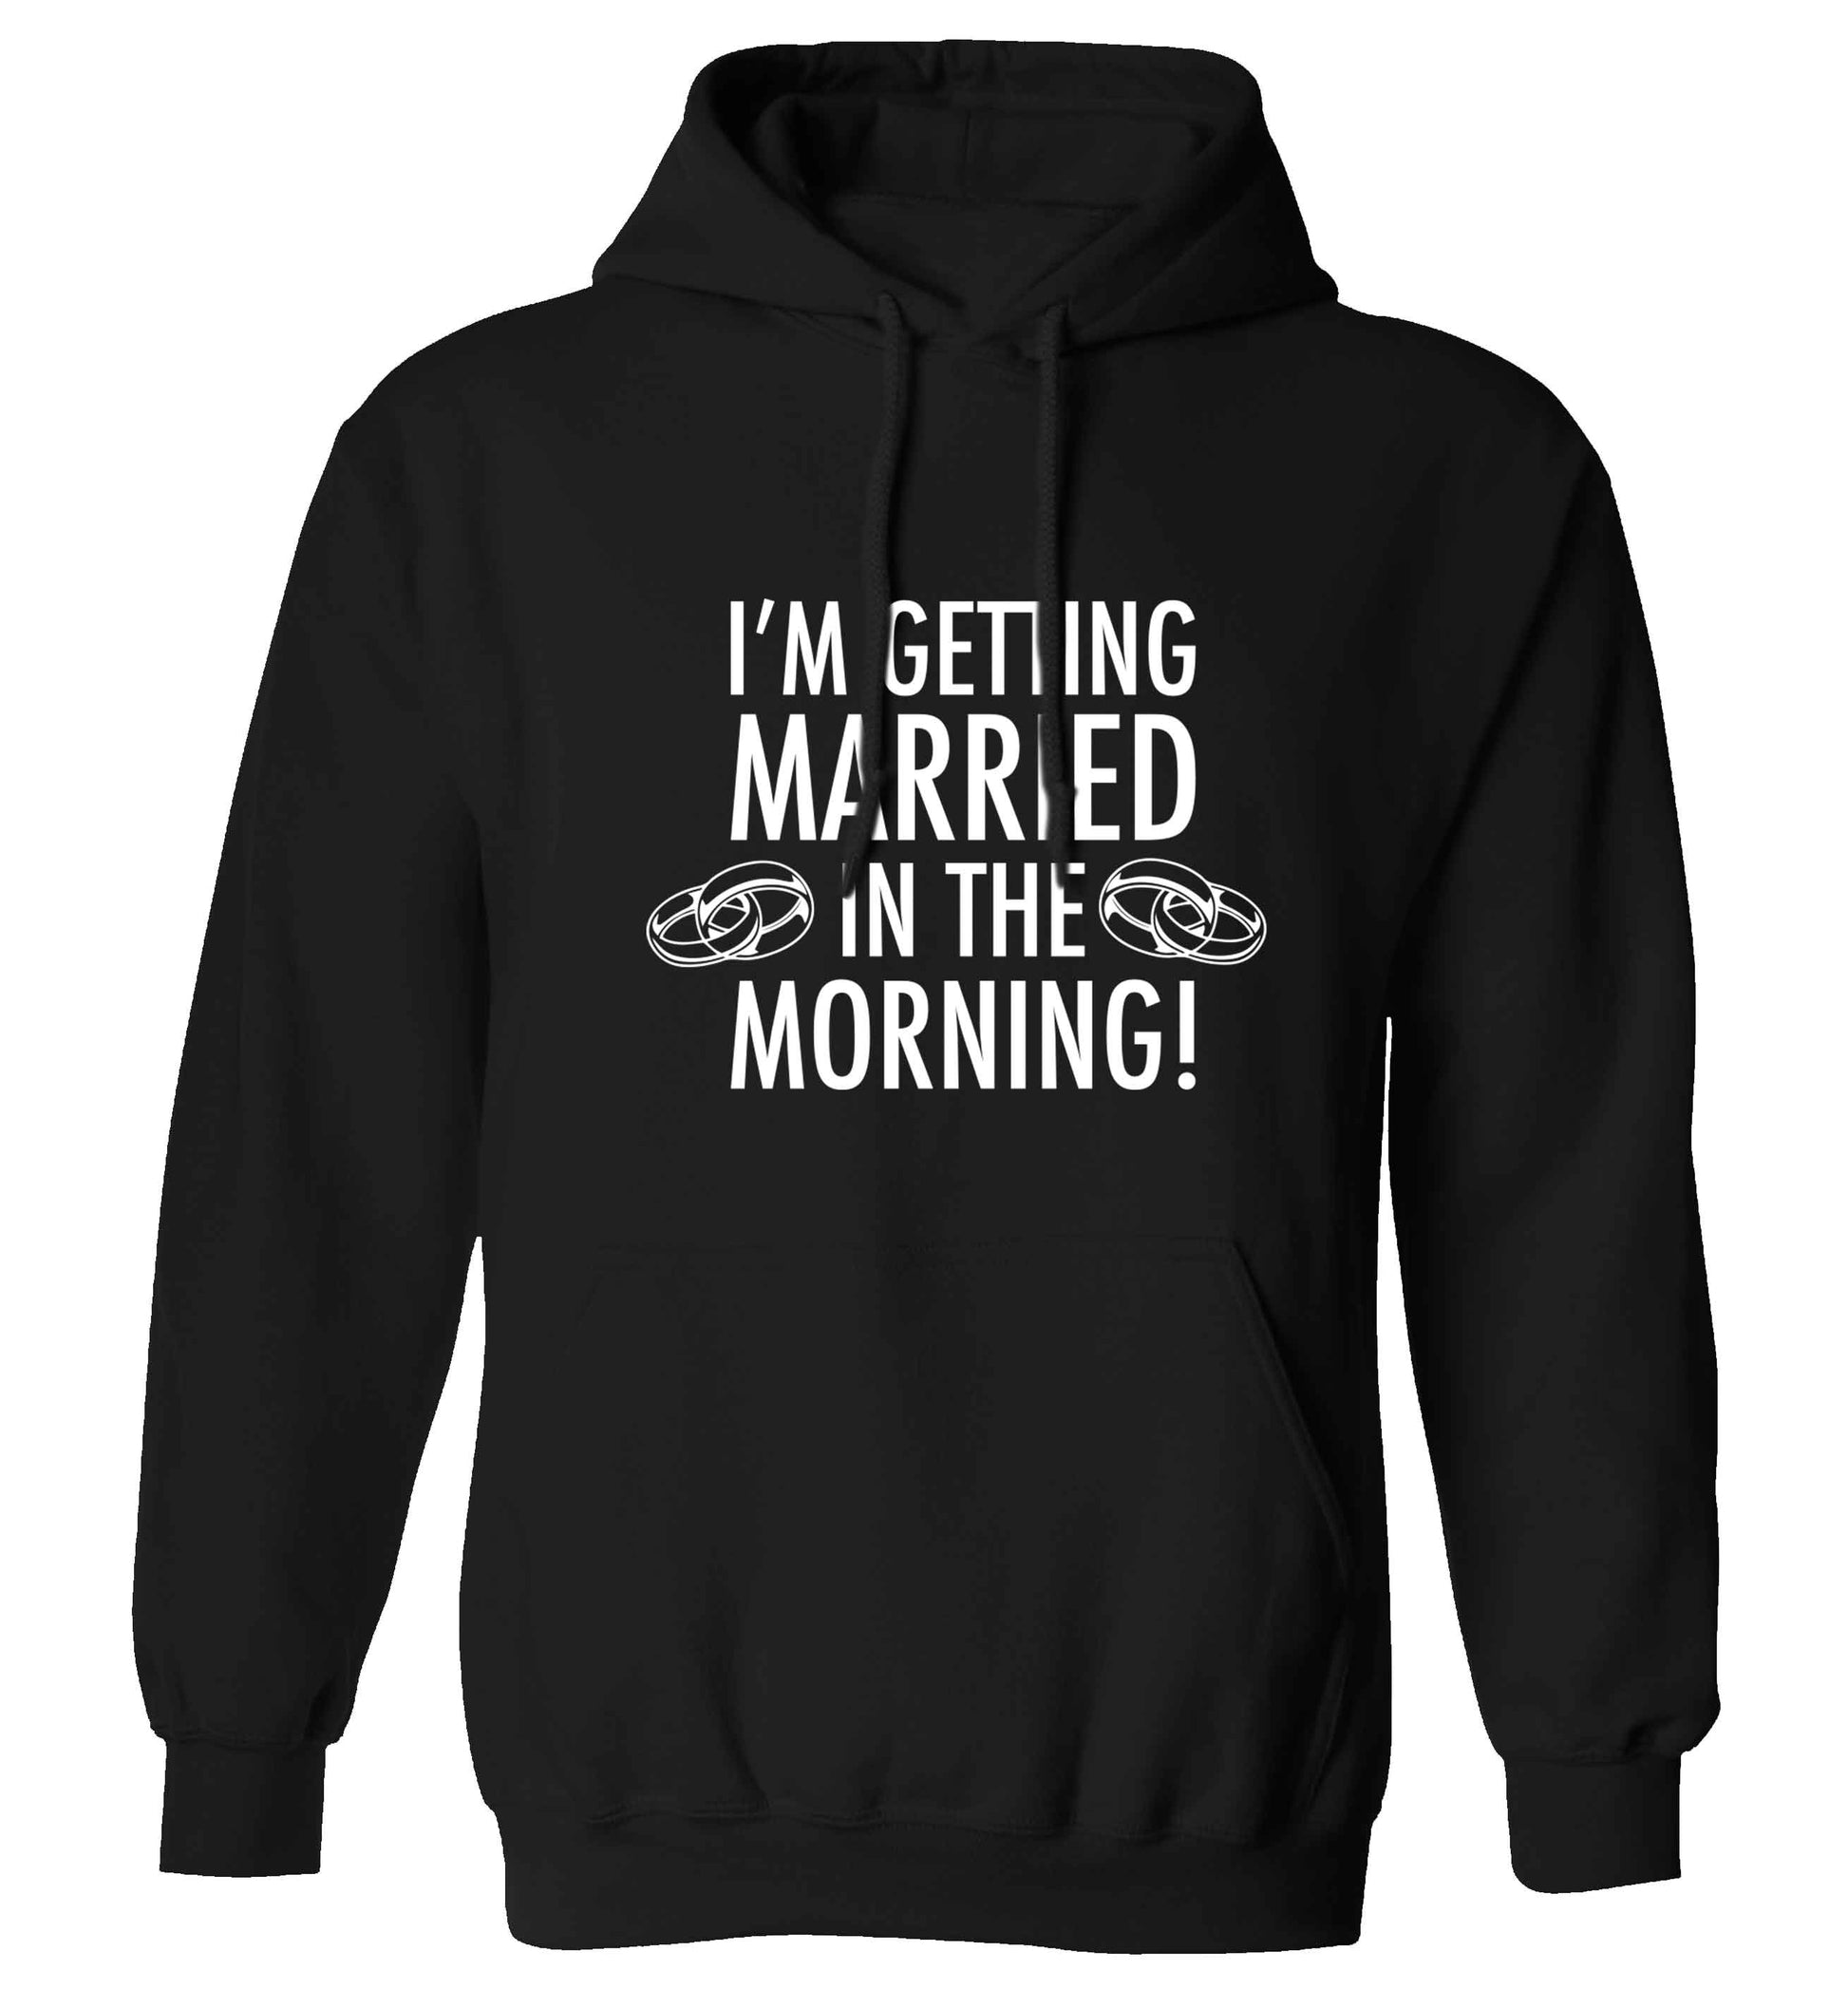 I'm getting married in the morning! adults unisex black hoodie 2XL